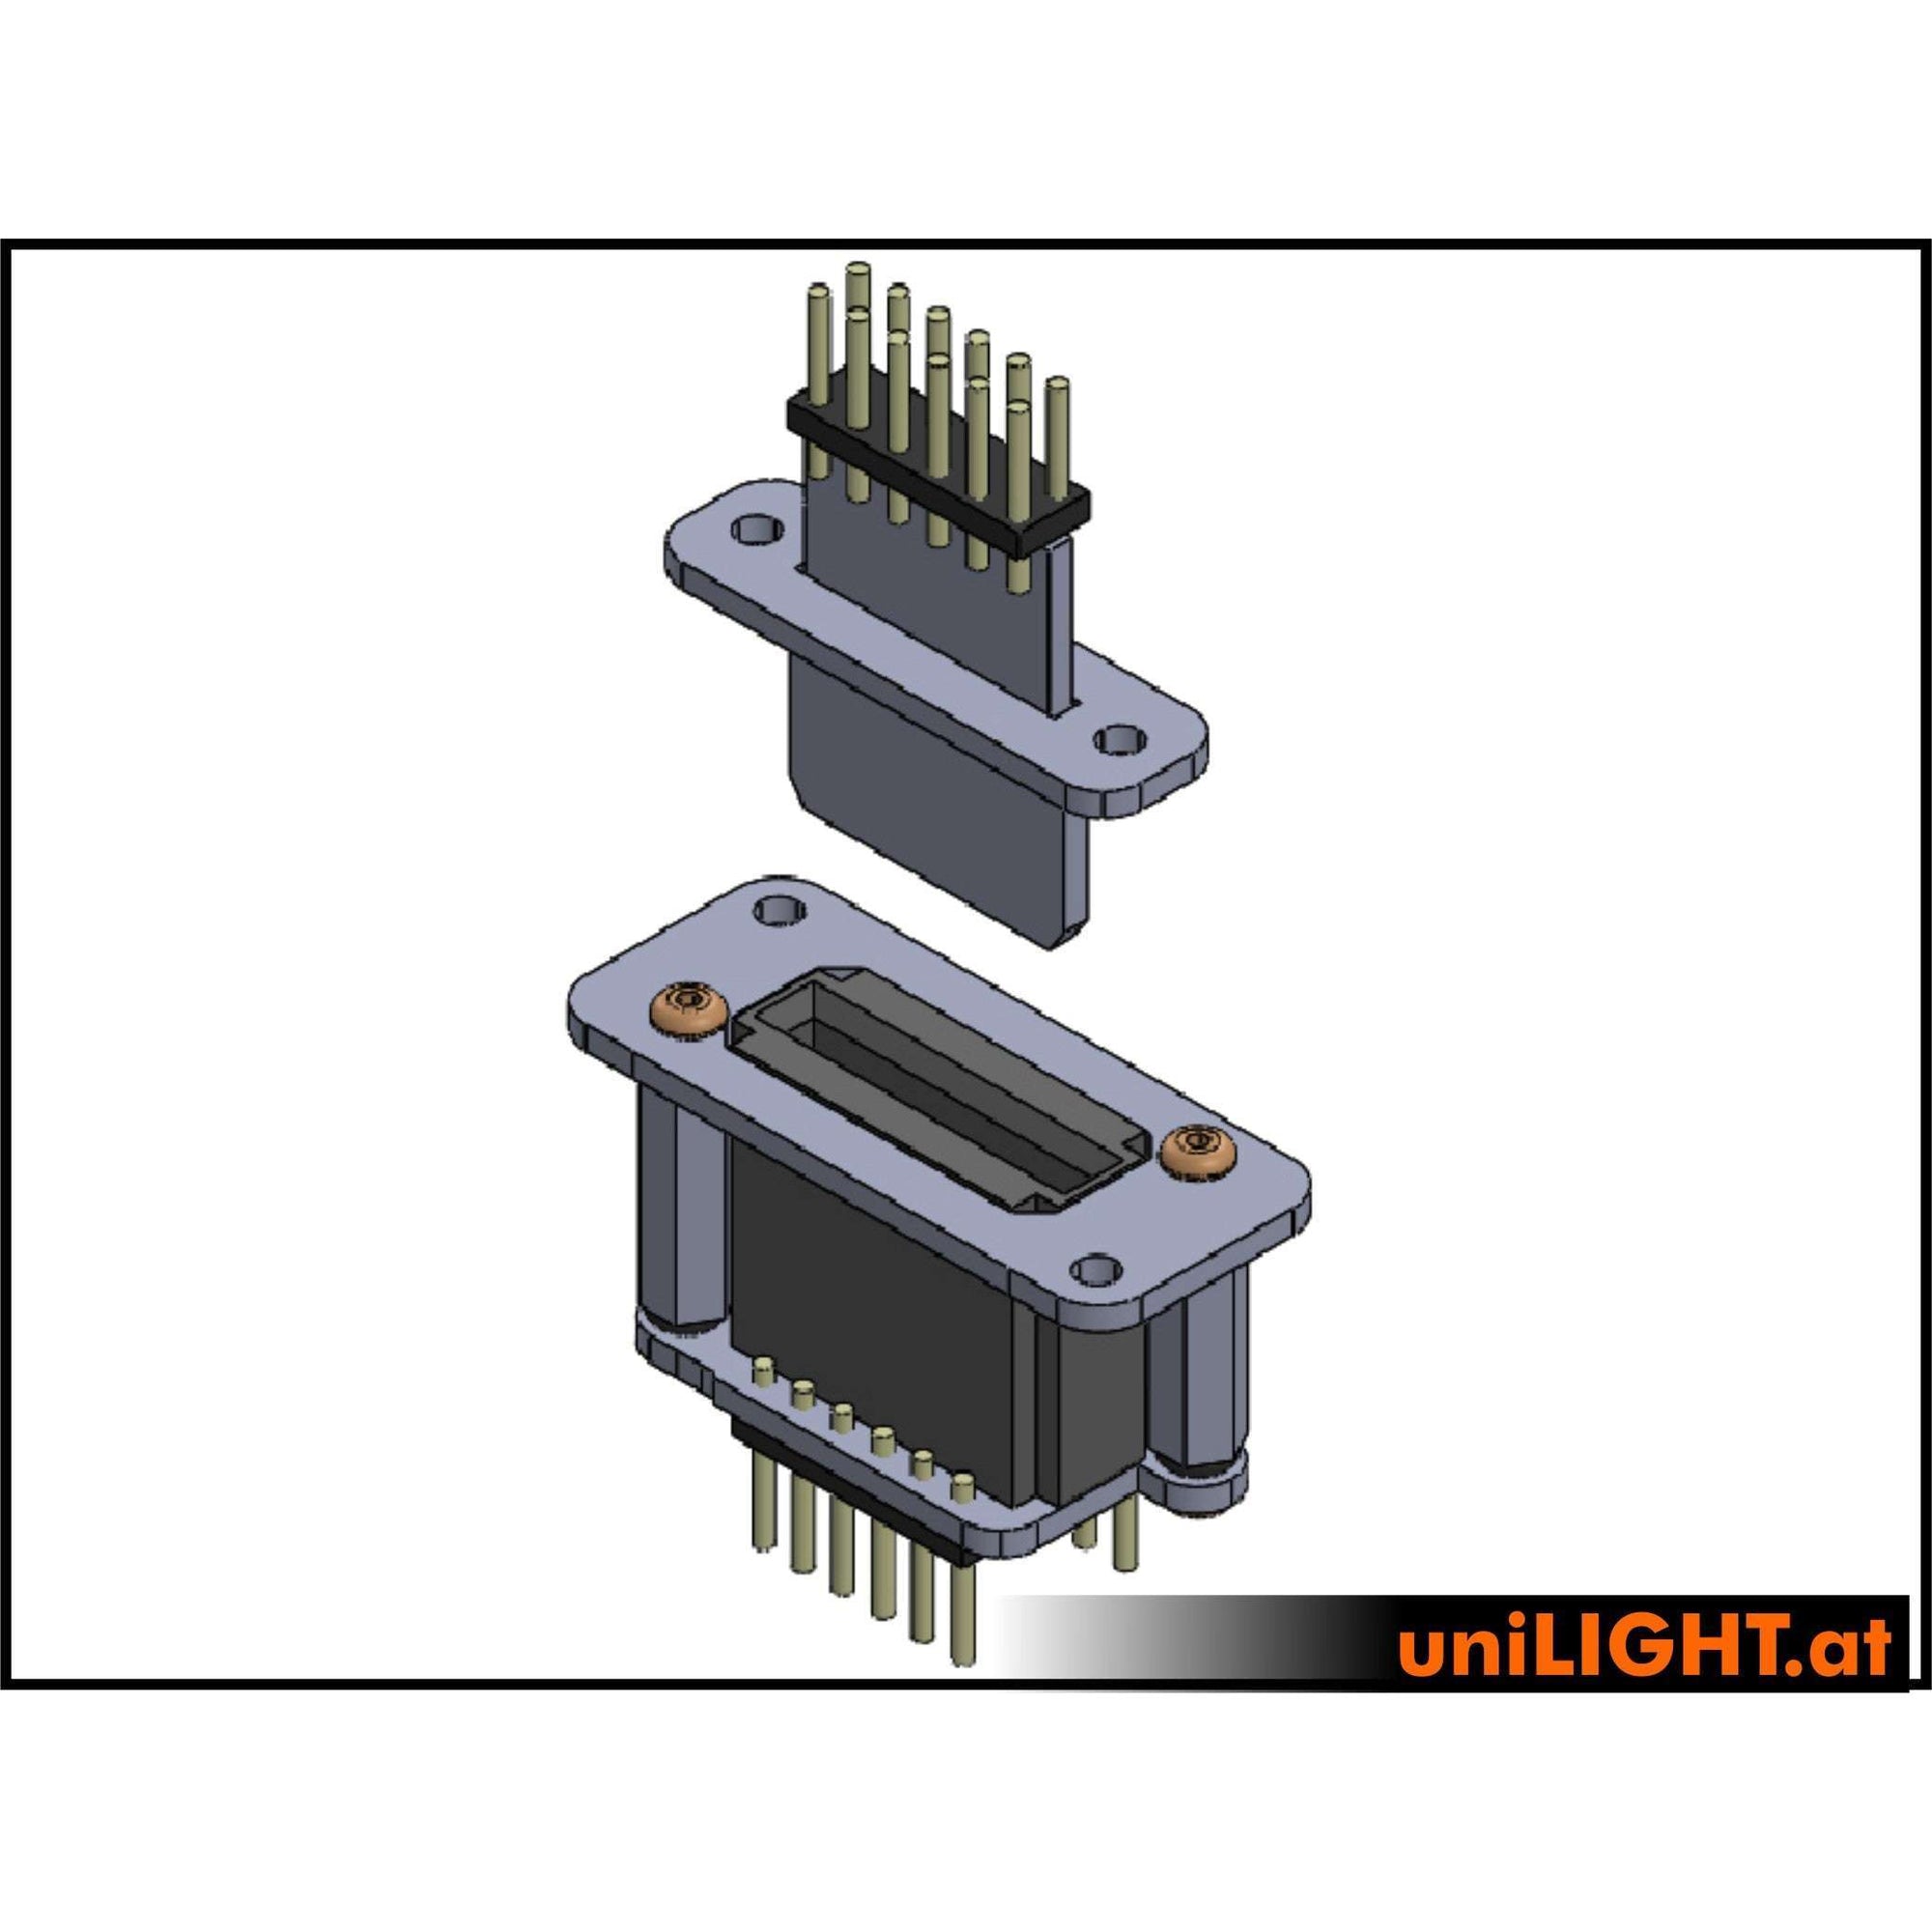 Header cable connection, 3 primary 6 secondary pins